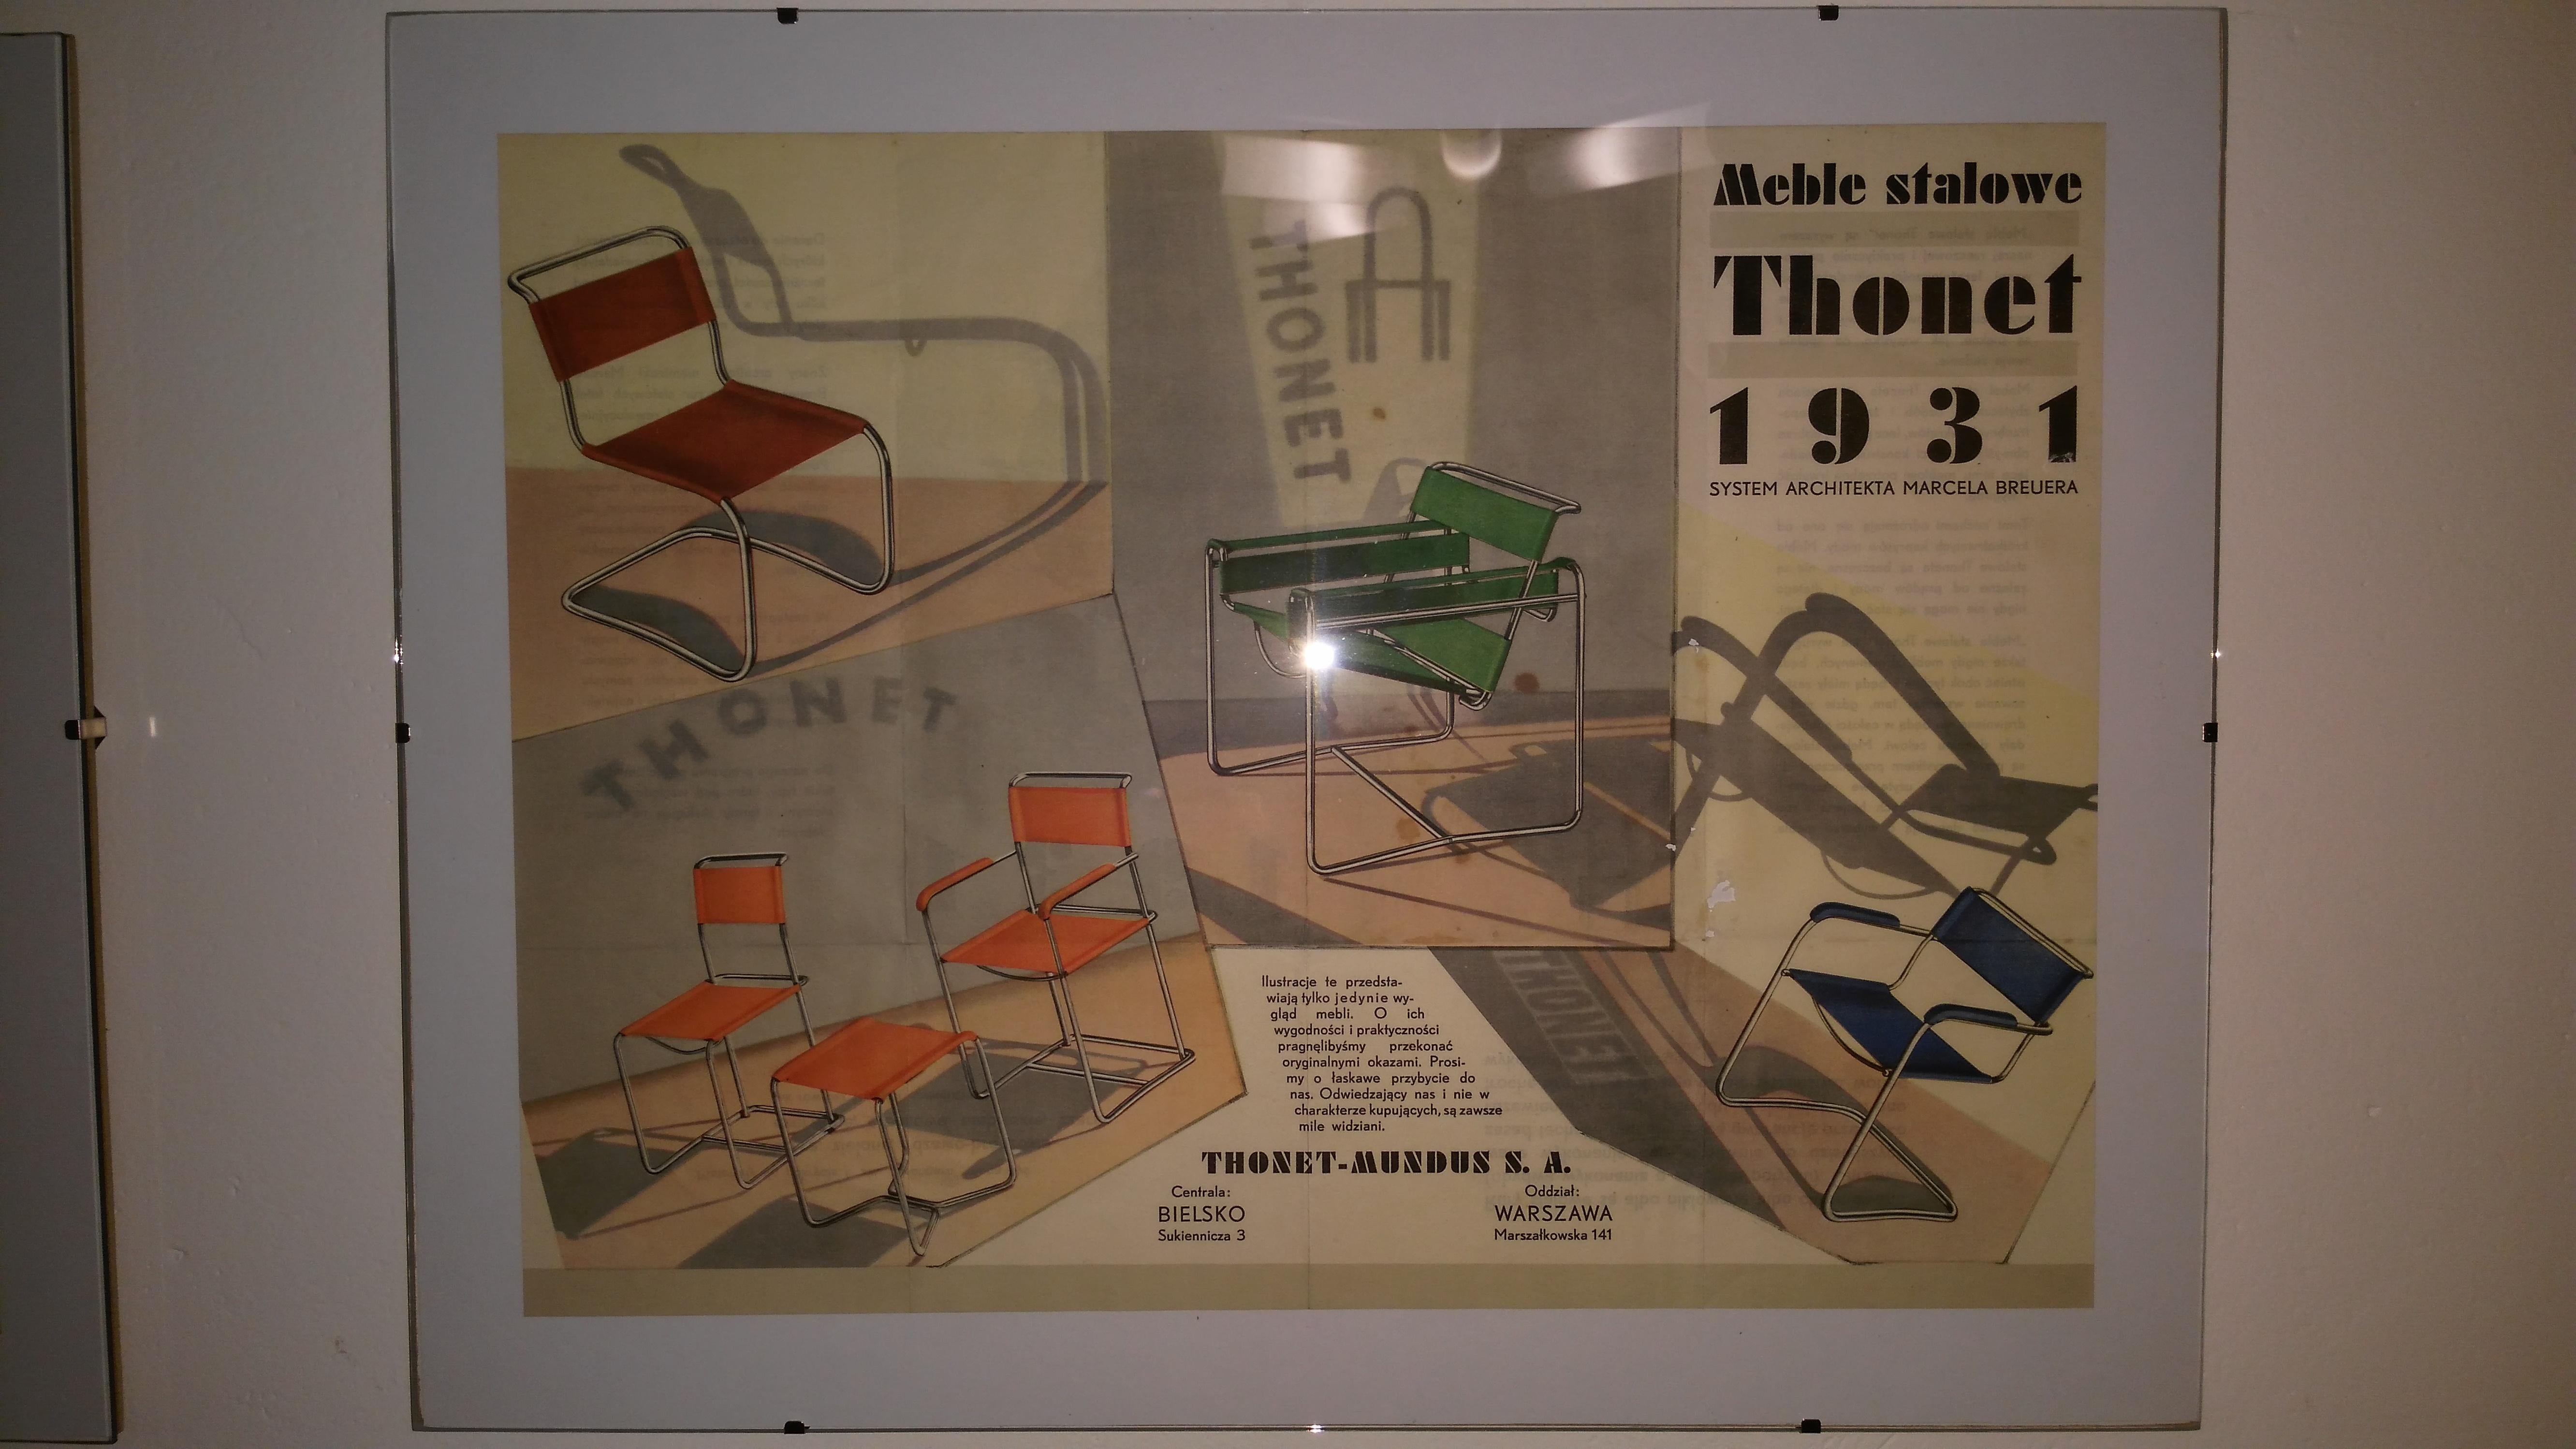 - 1931
- maker: Thonet
- original, no reprint
- quite good condition (one with small hole)
- bright and nice colors
- one is in Polish, one in Czech
- frame dimensions: 46 x 36 cm.